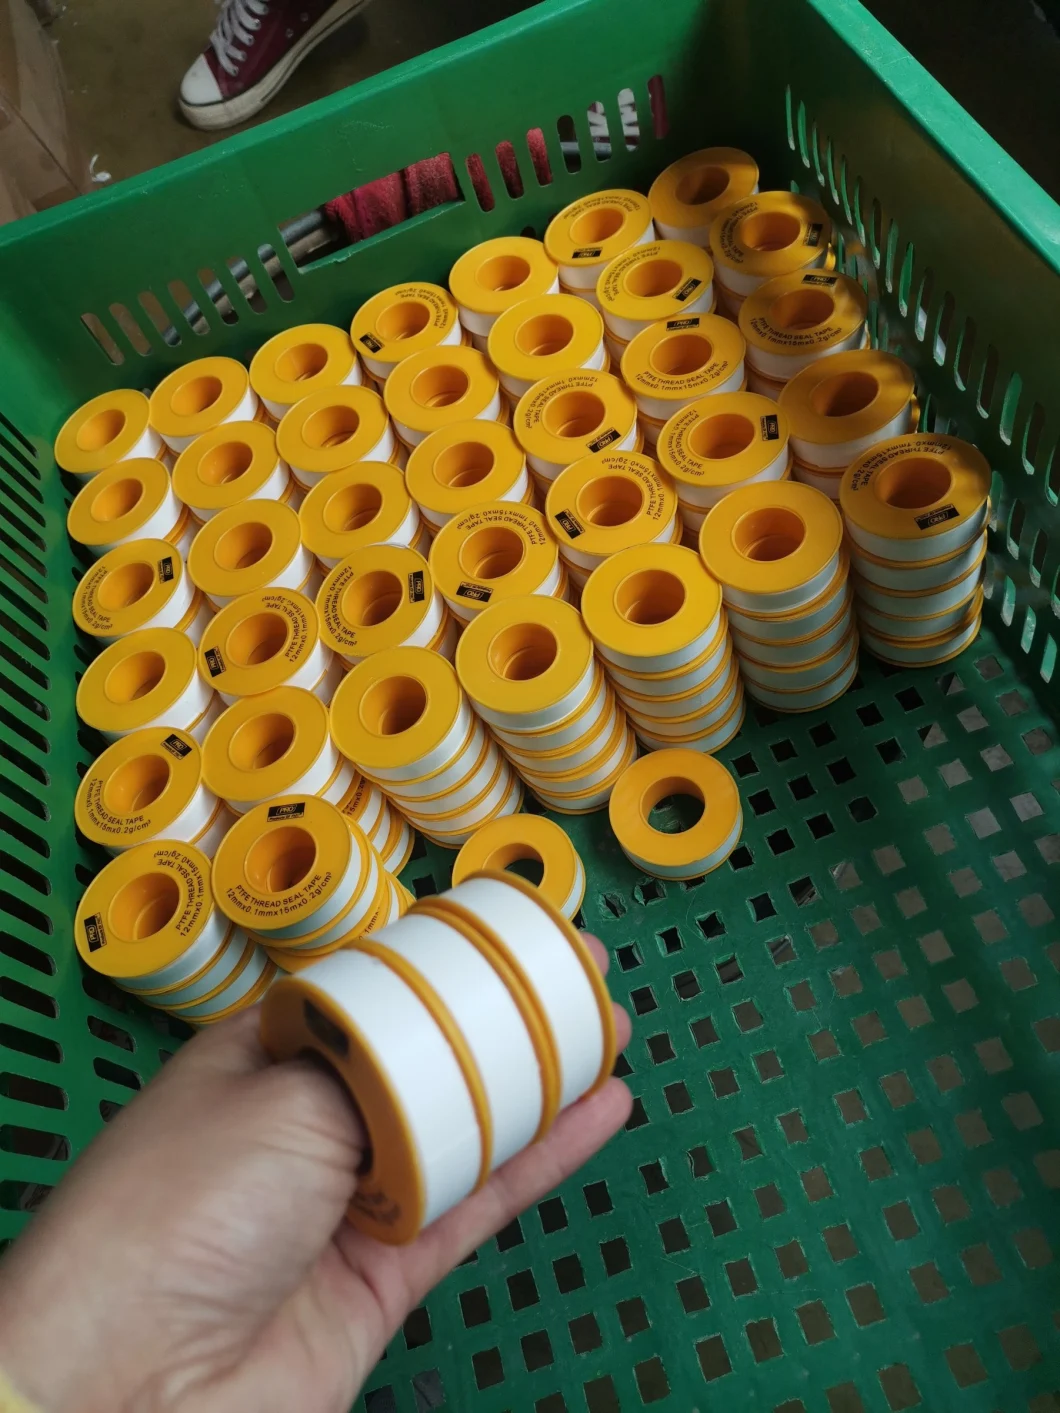 High Quality Expanded PTFE Tape on Sale